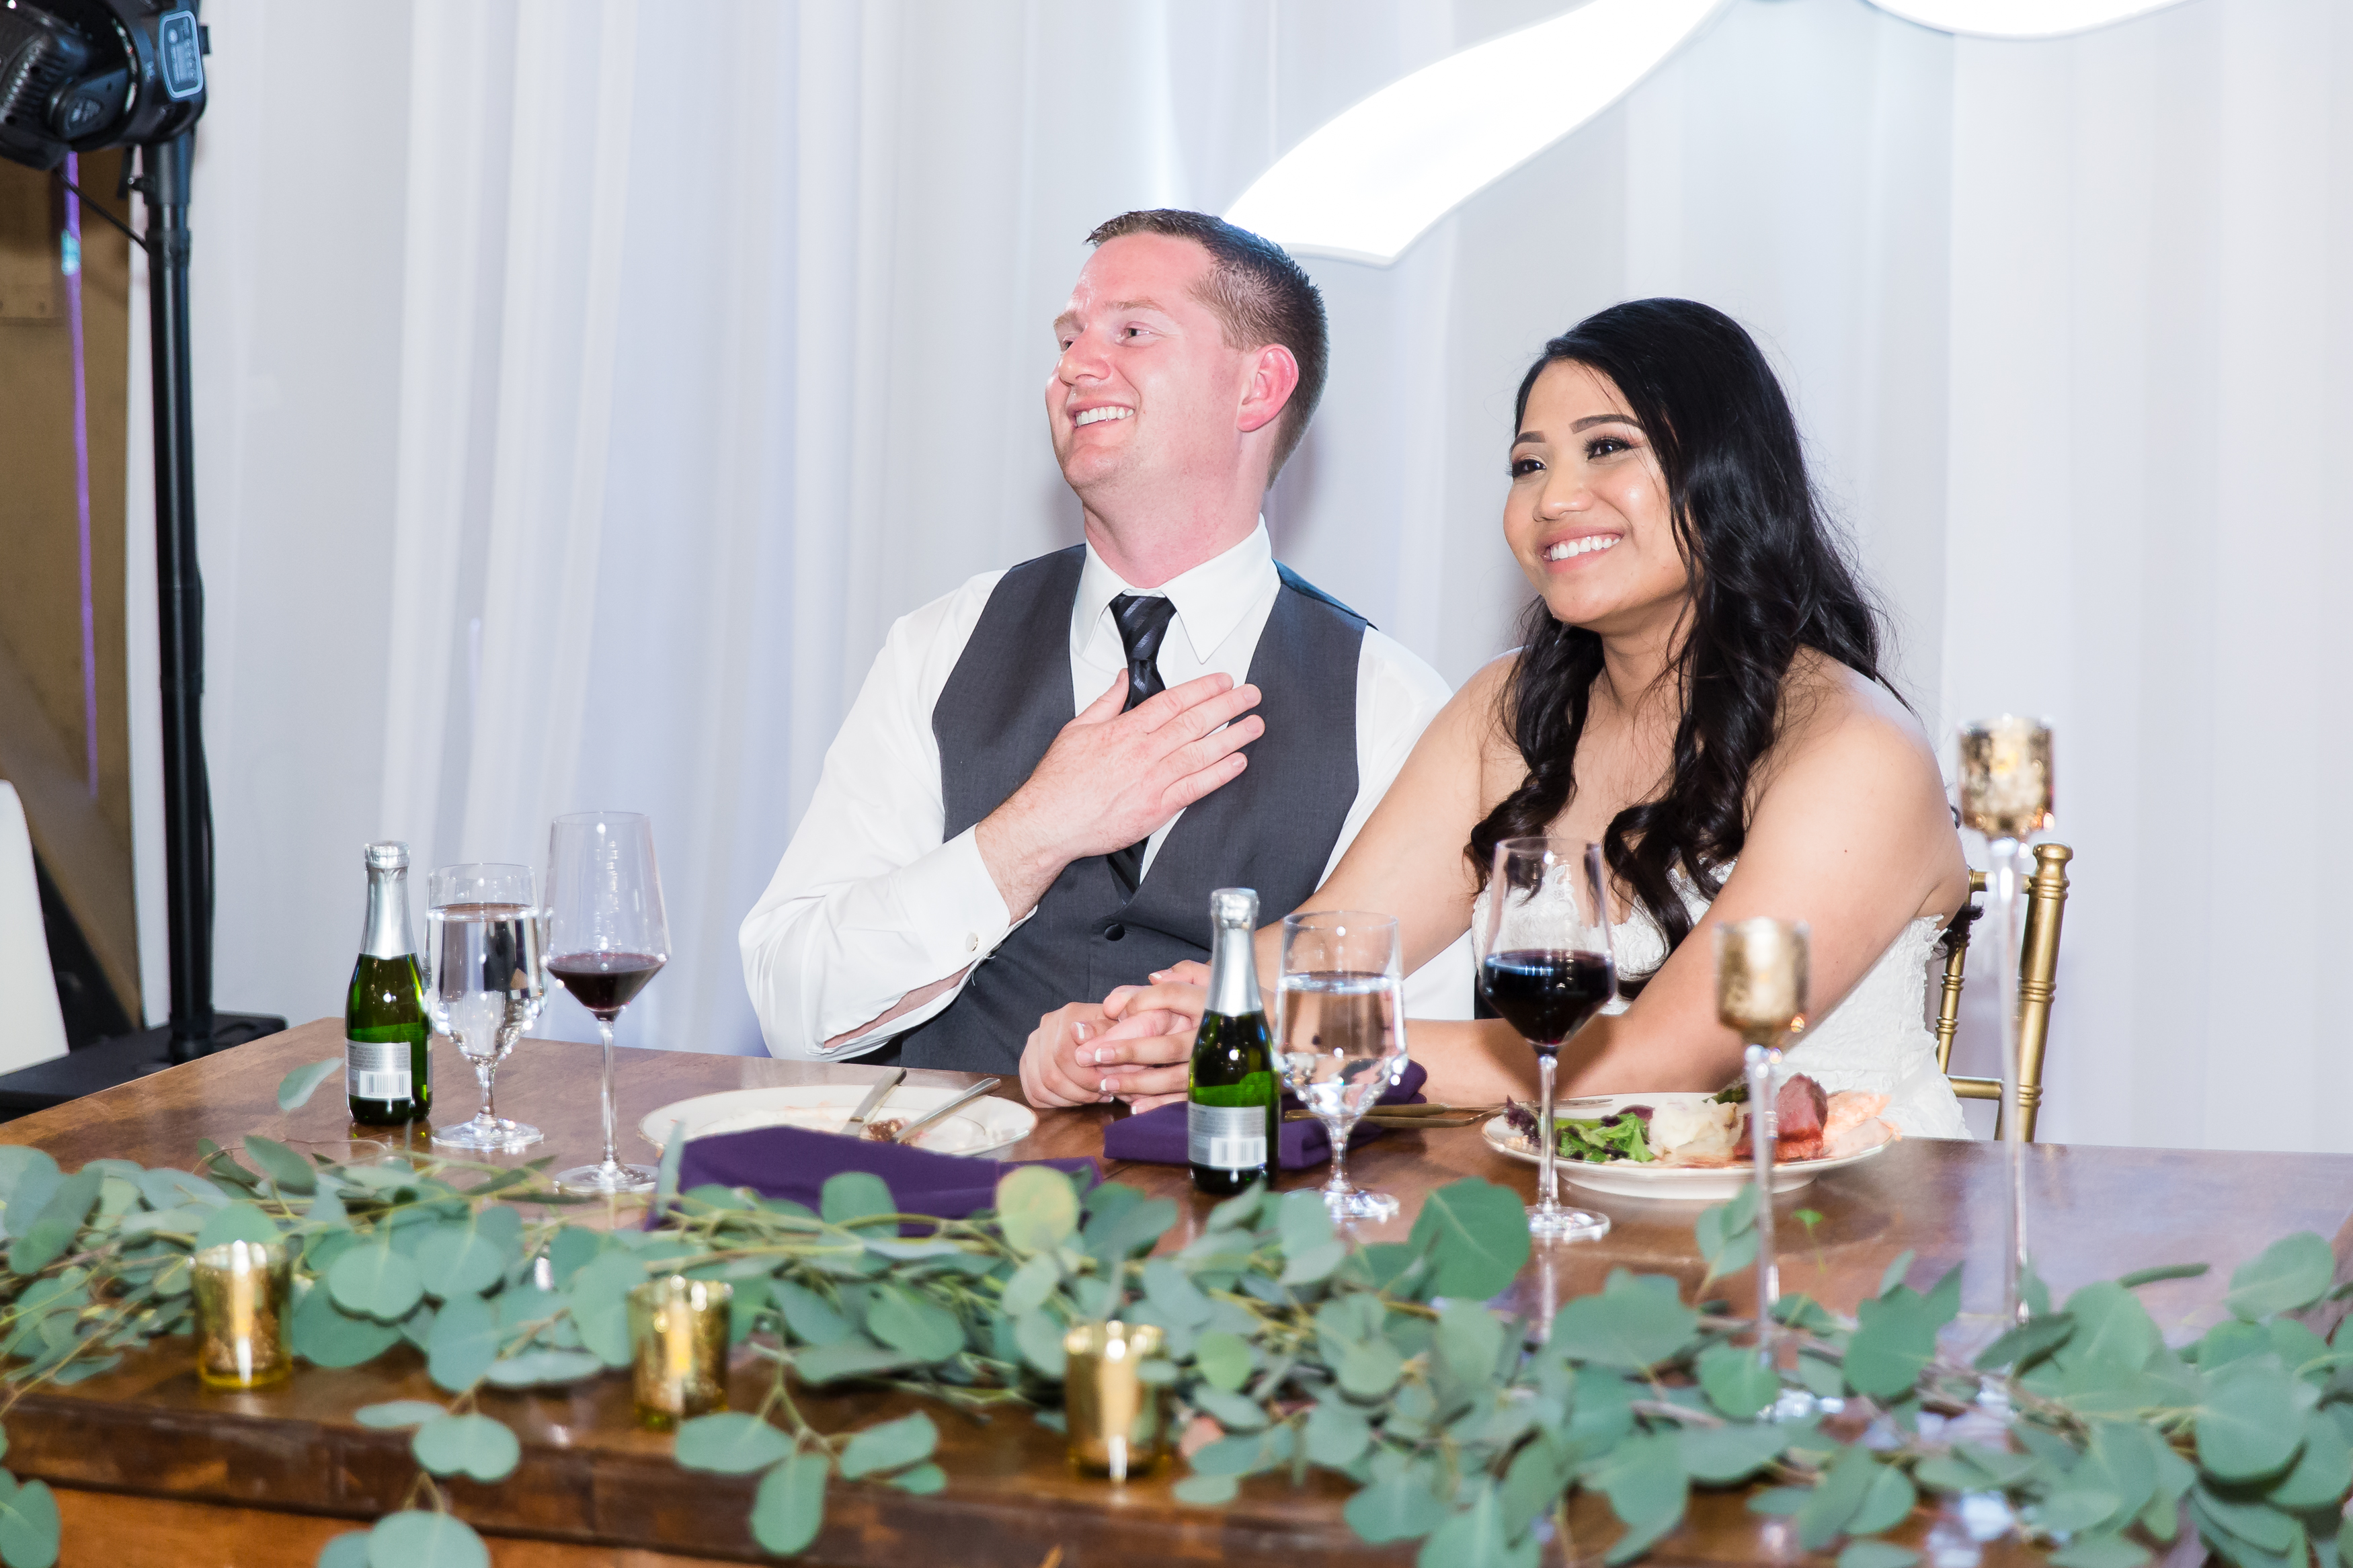 Bride and groom laughing sweetly at sweetheart table during reception